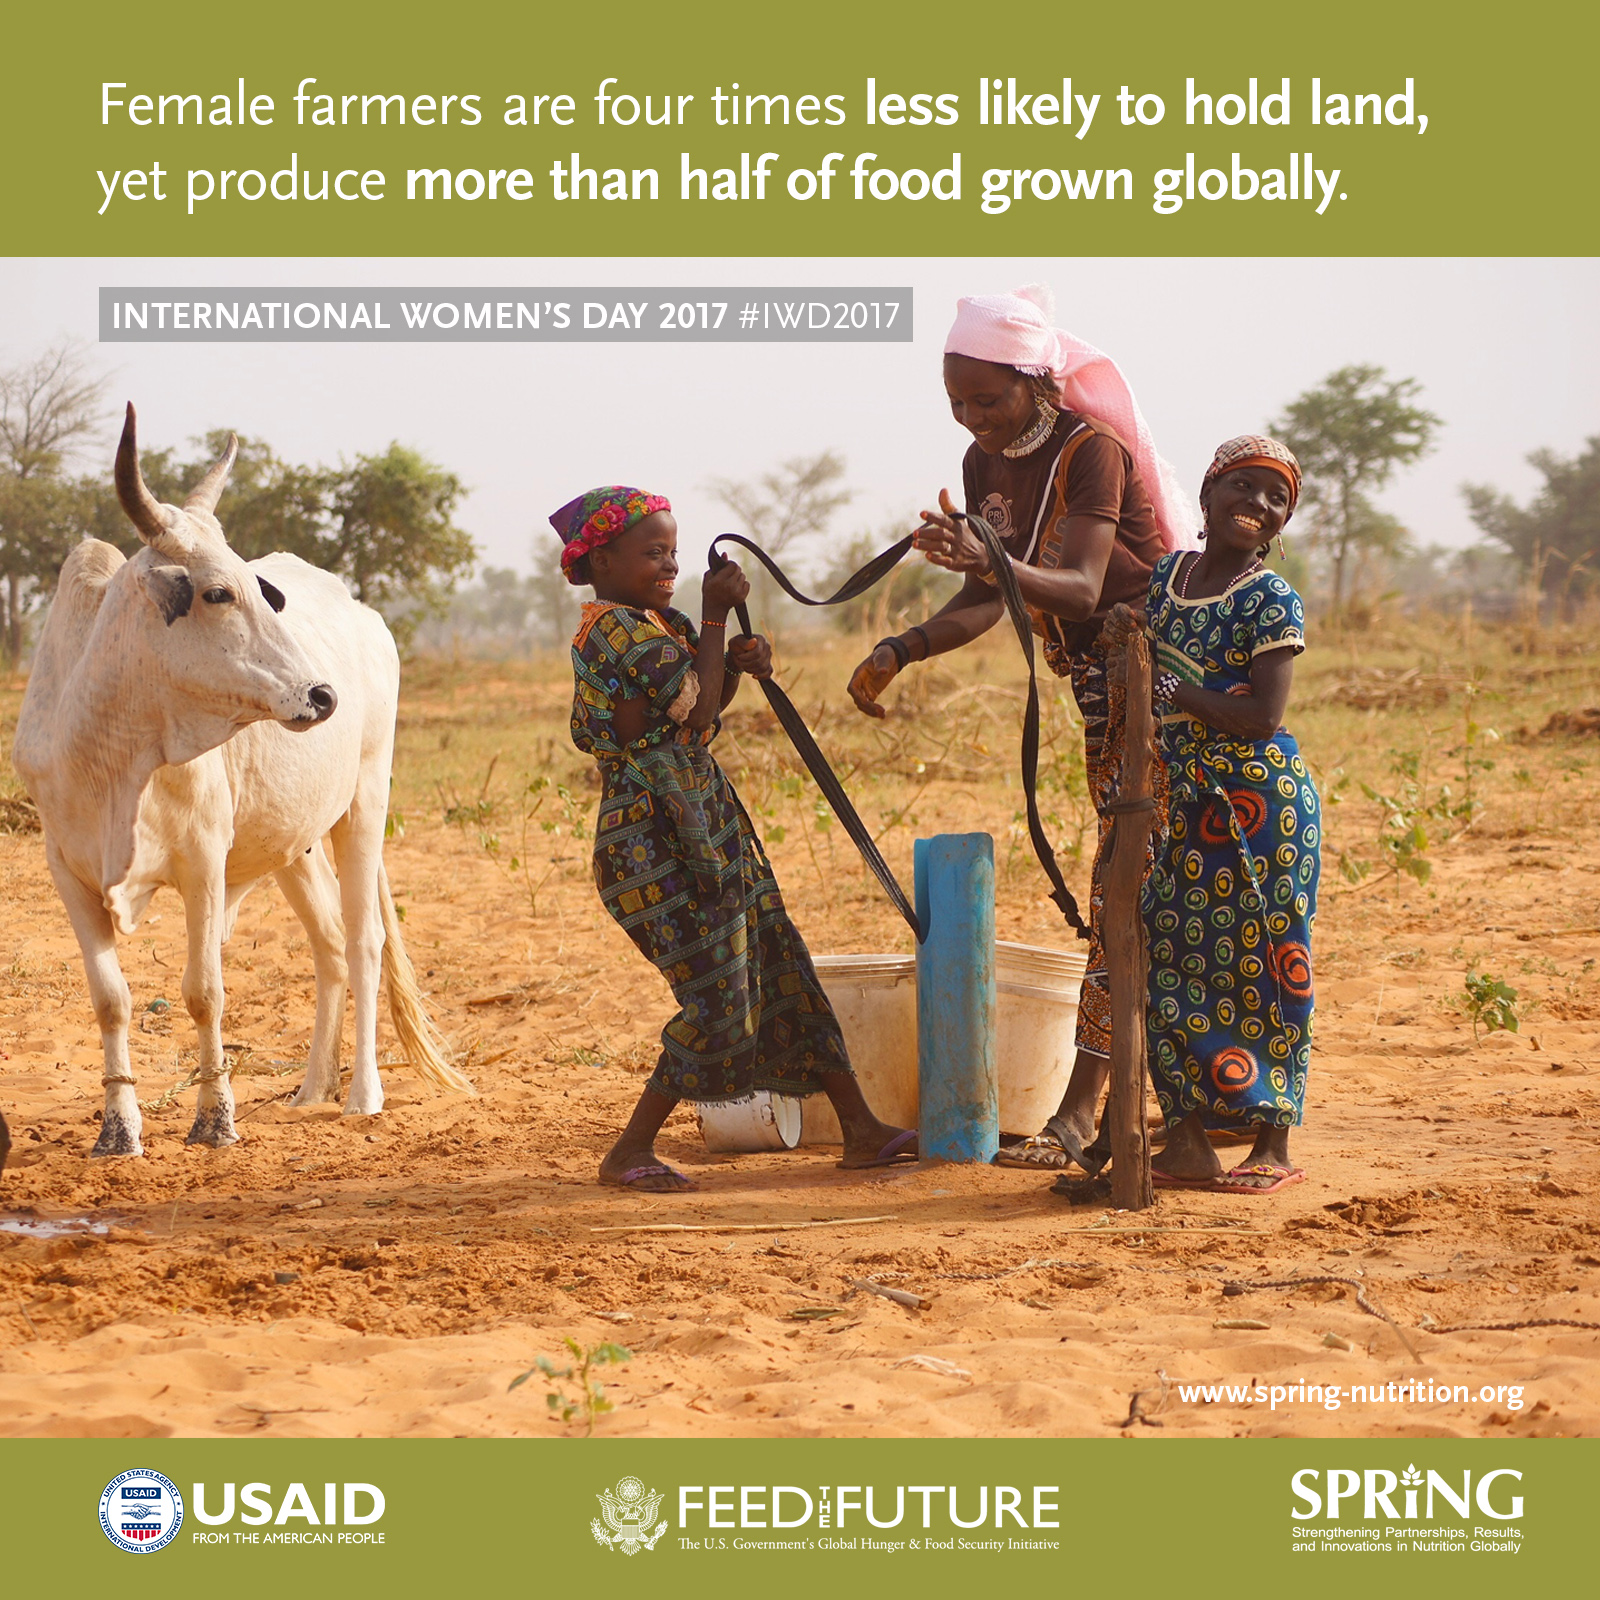 Female farmers are four times less likely to hold land, yet produce more than half of food grown globally.